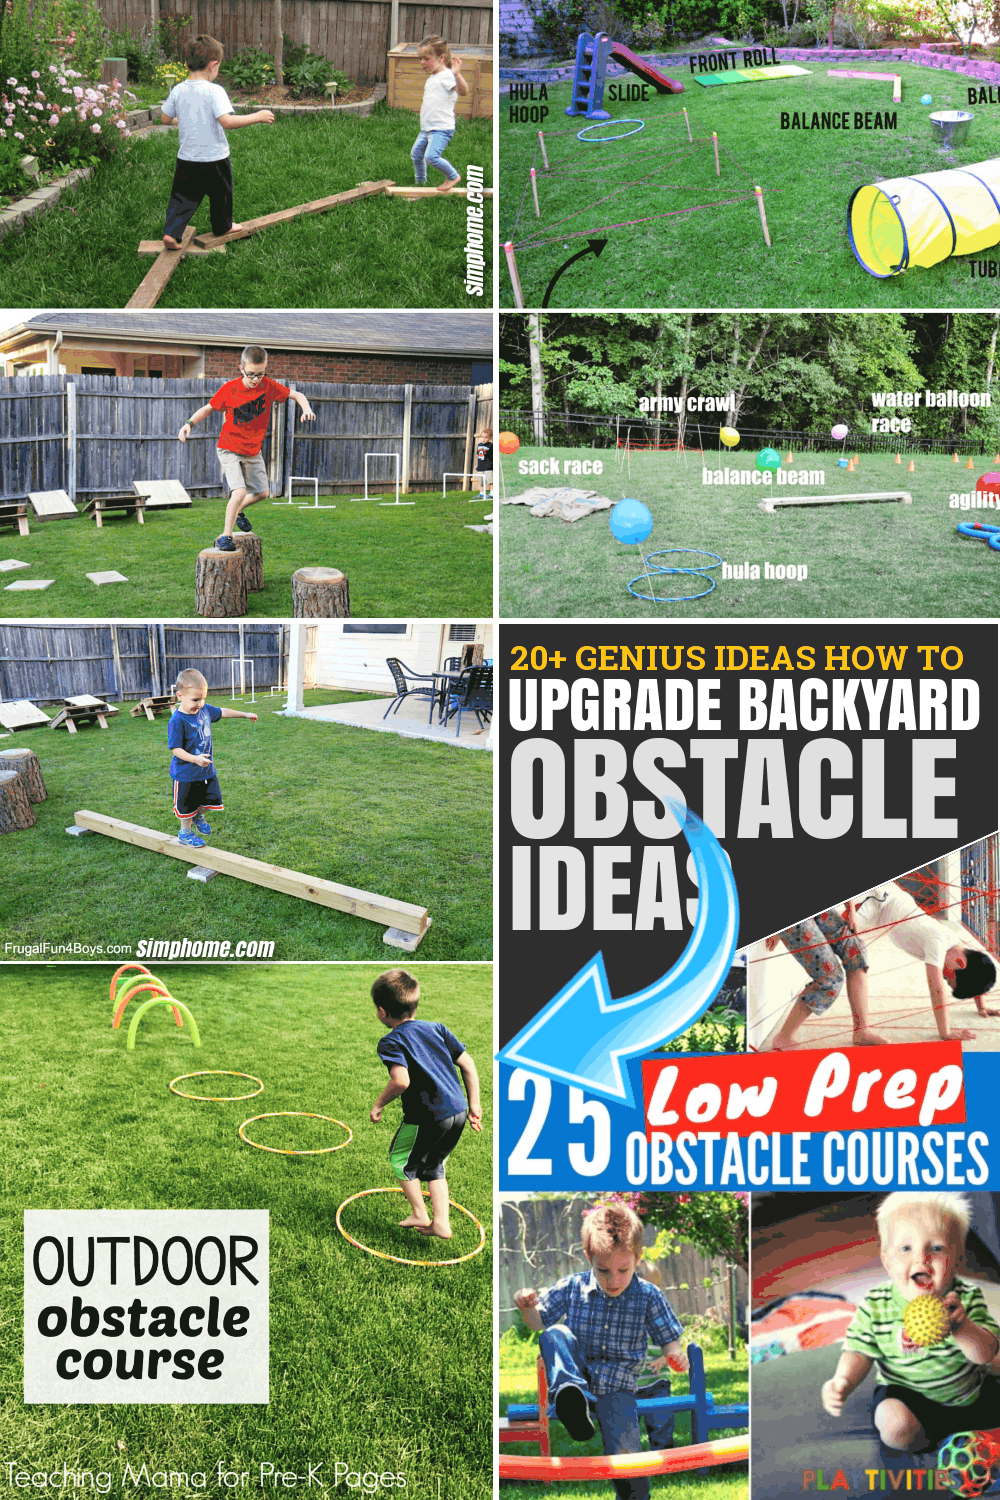 SIMPHOME.COM 10 Genius Tricks of How to Upgrade Backyard Obstacle Course Ideas Featured Image